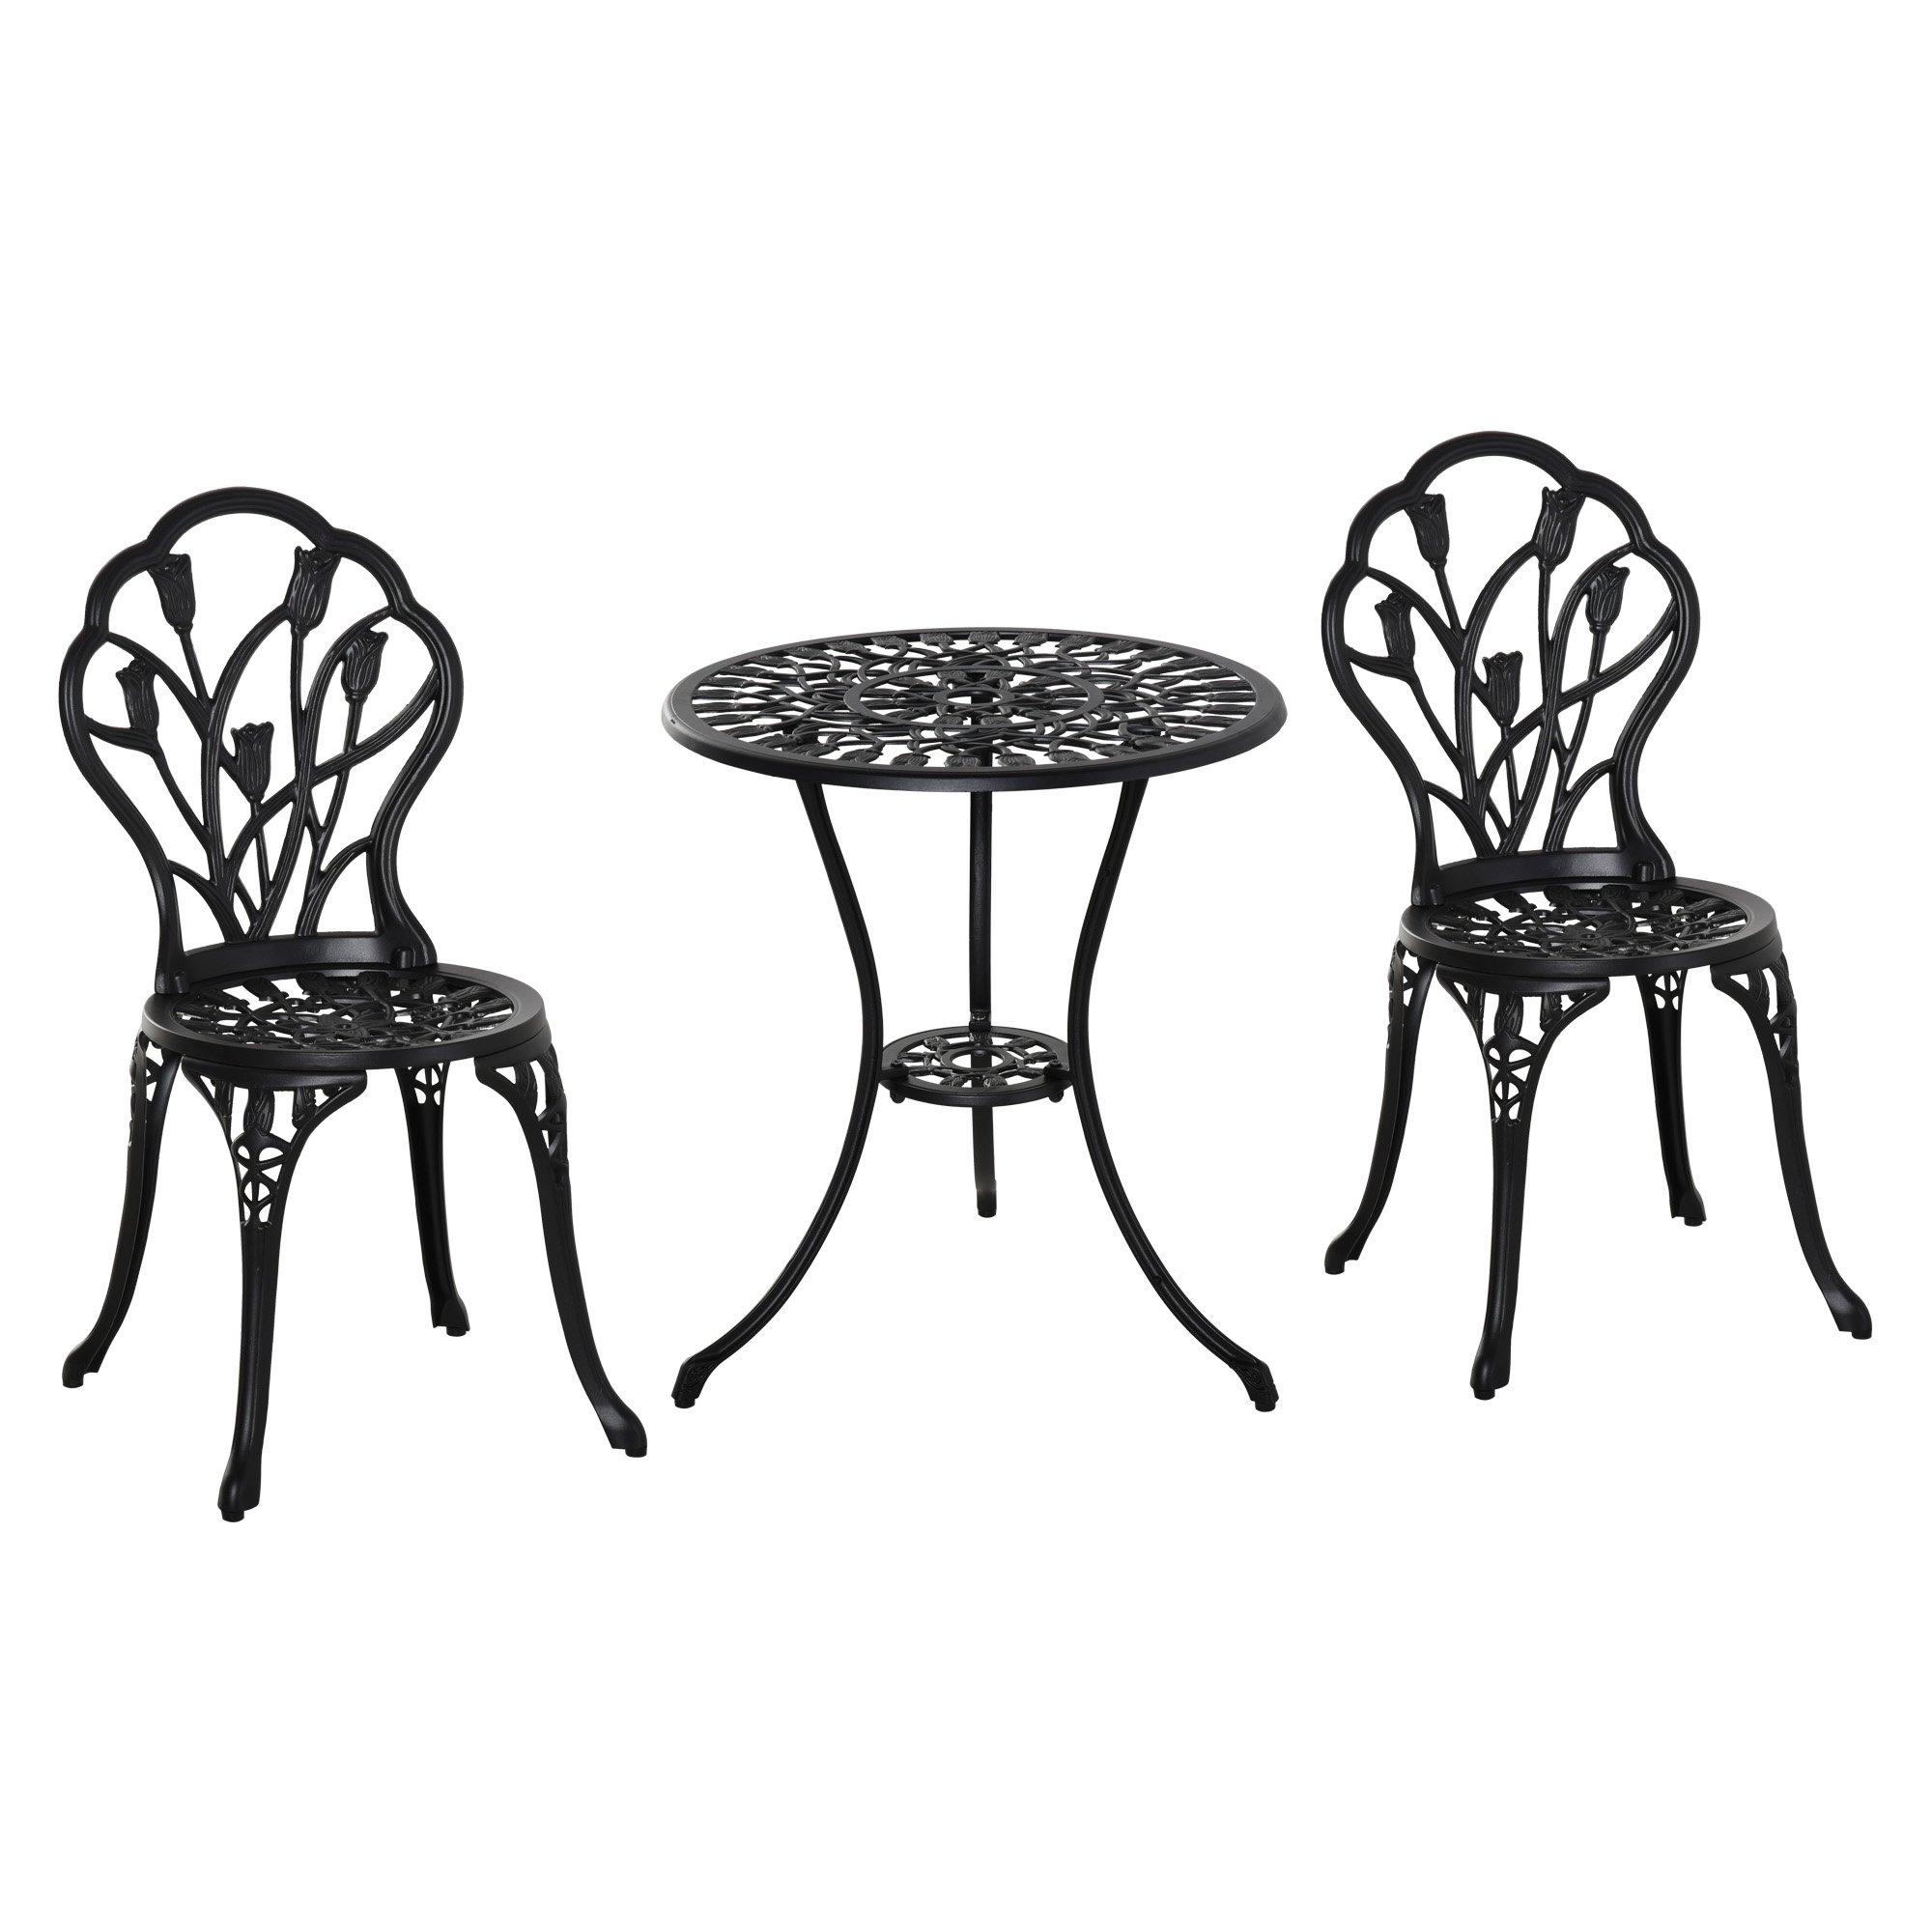 3 Piece Patio Bistro Set, Aluminium Garden Table and Chairs with Umbrella Hole